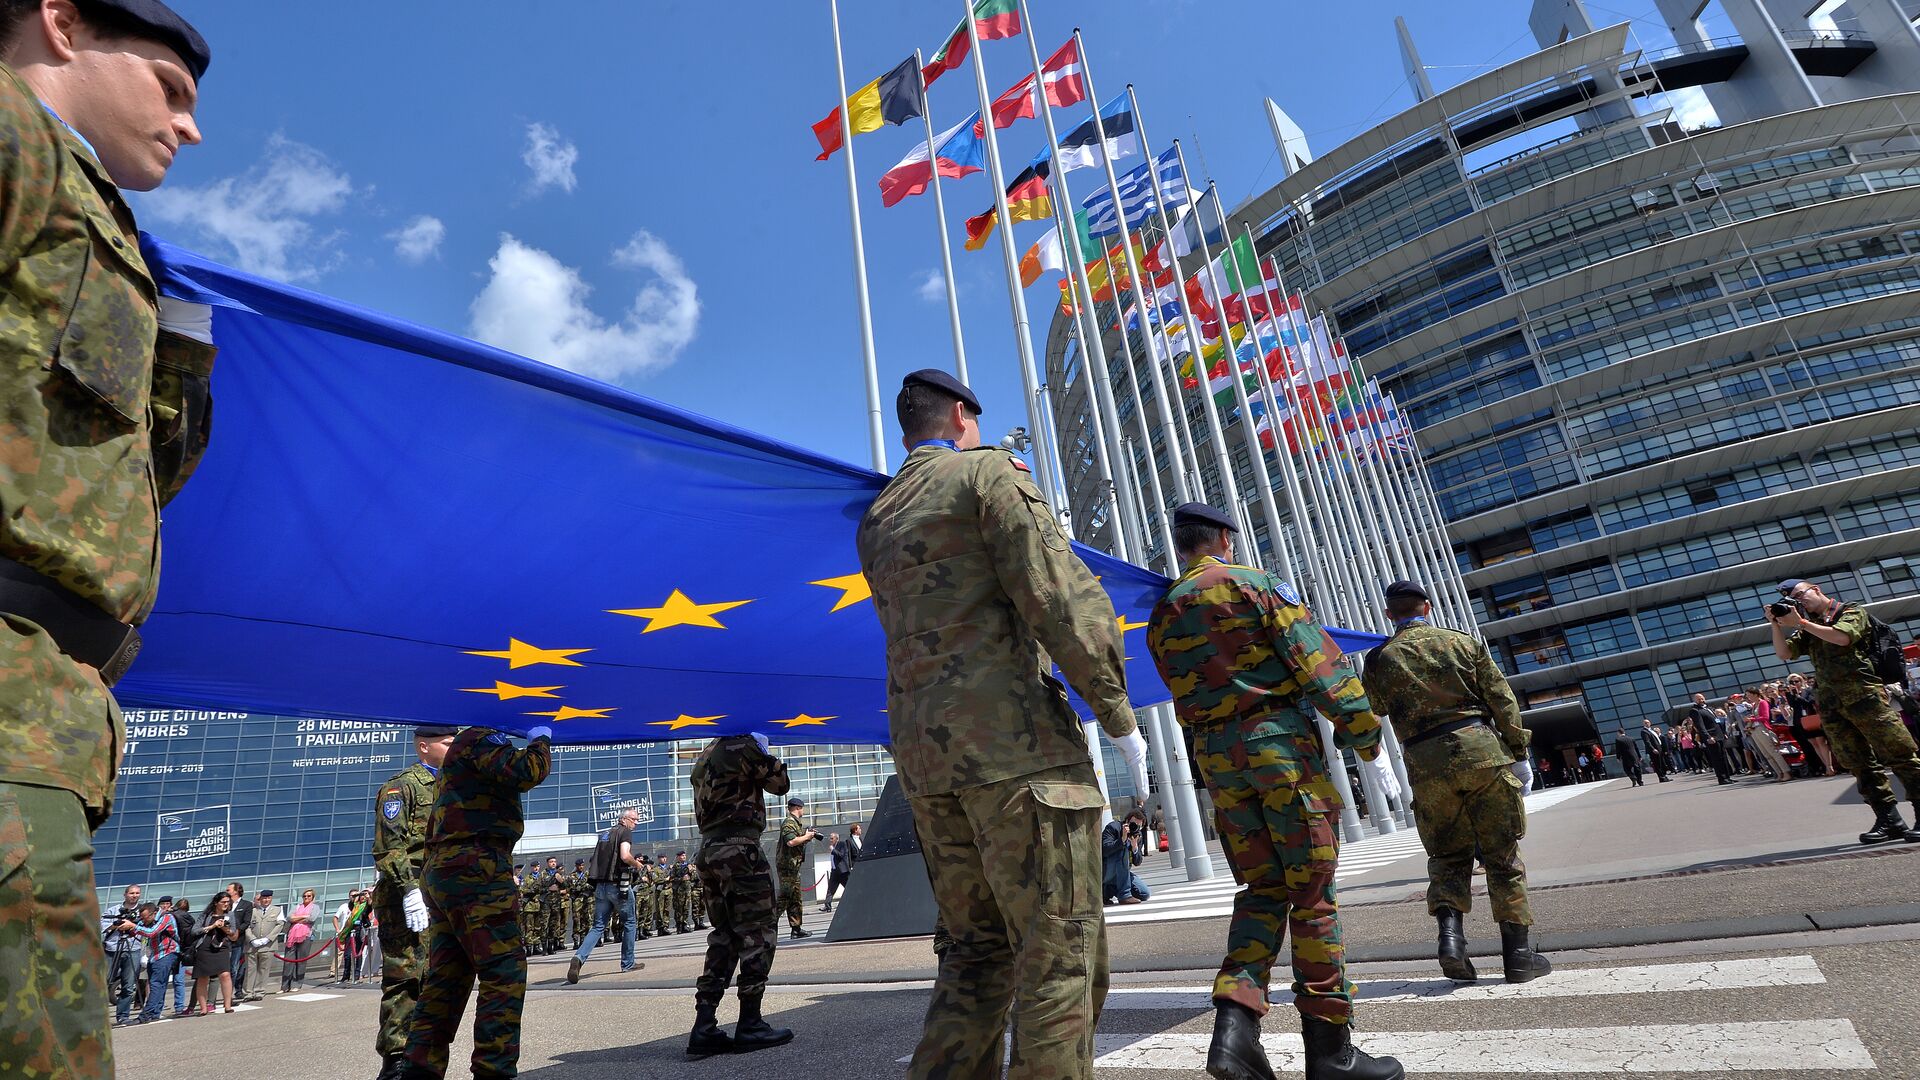 Soldiers of a Eurocorps detachment carry the European Union flag to mark the inaugural European Parliament session on June 30, 2014, in front of the European Parliament in Strasbourg, eastern France - Sputnik International, 1920, 08.09.2021